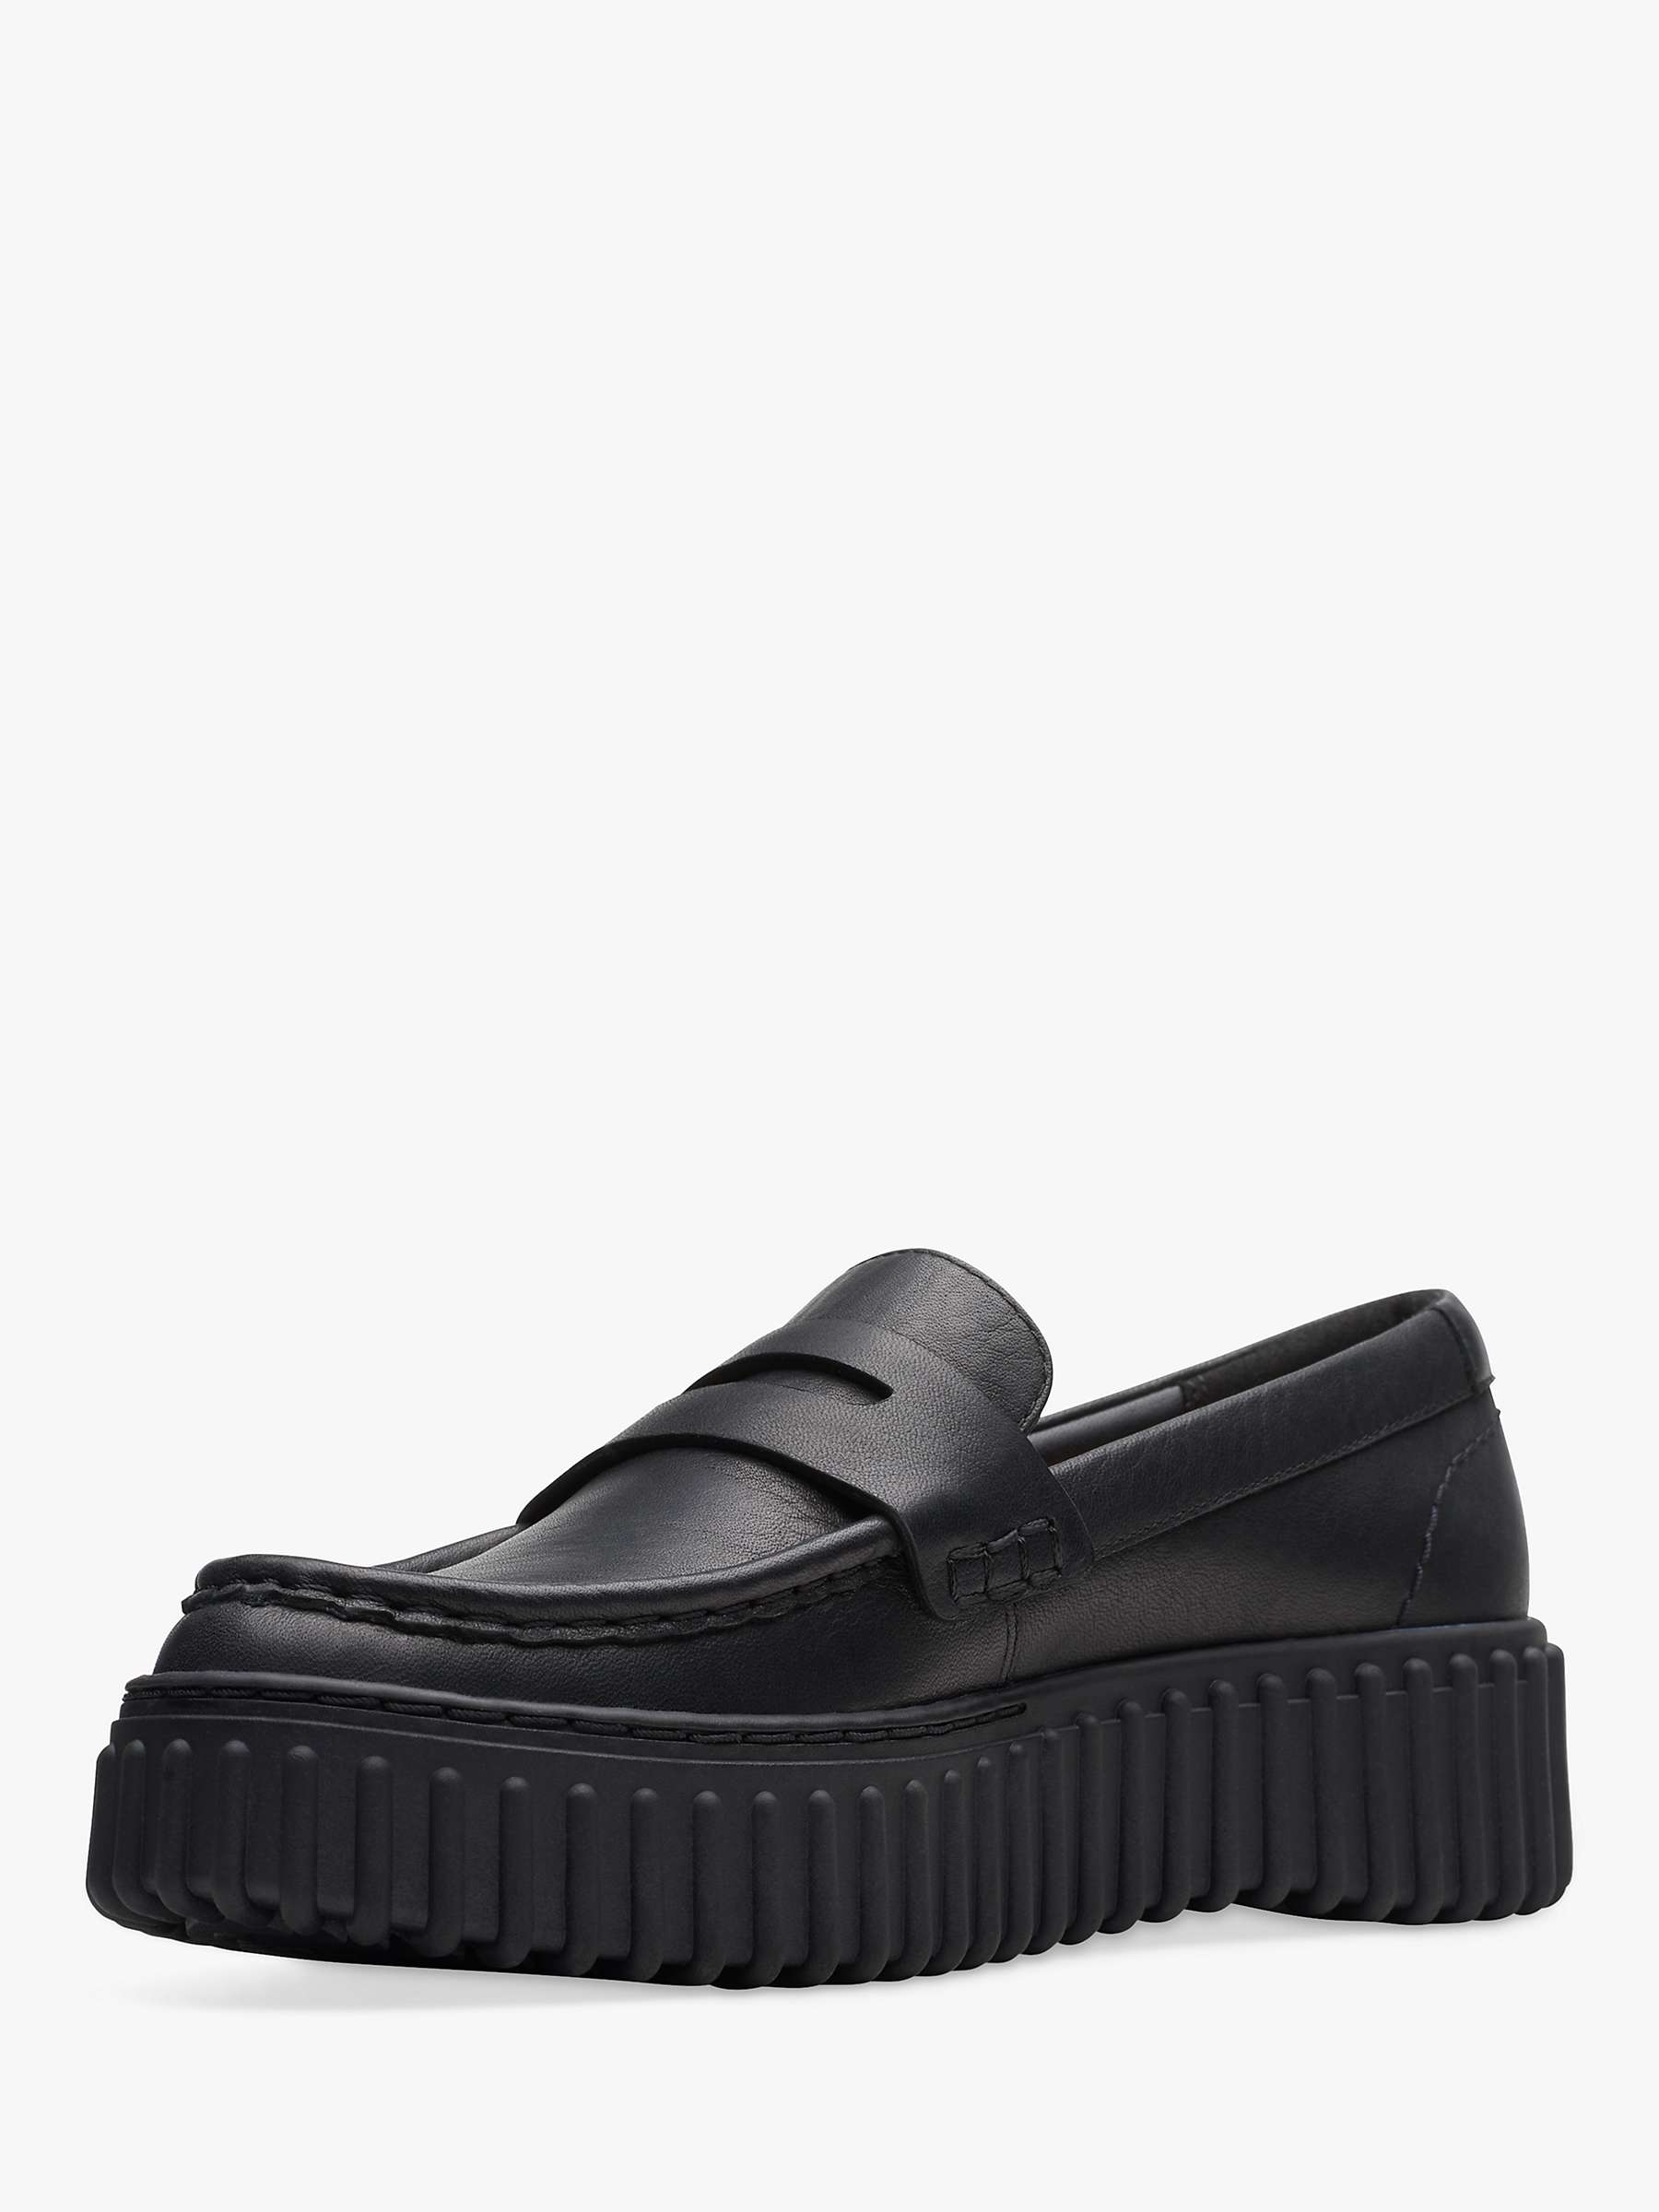 Buy Clarks Torhill Penny Leather Shoes, Black Online at johnlewis.com